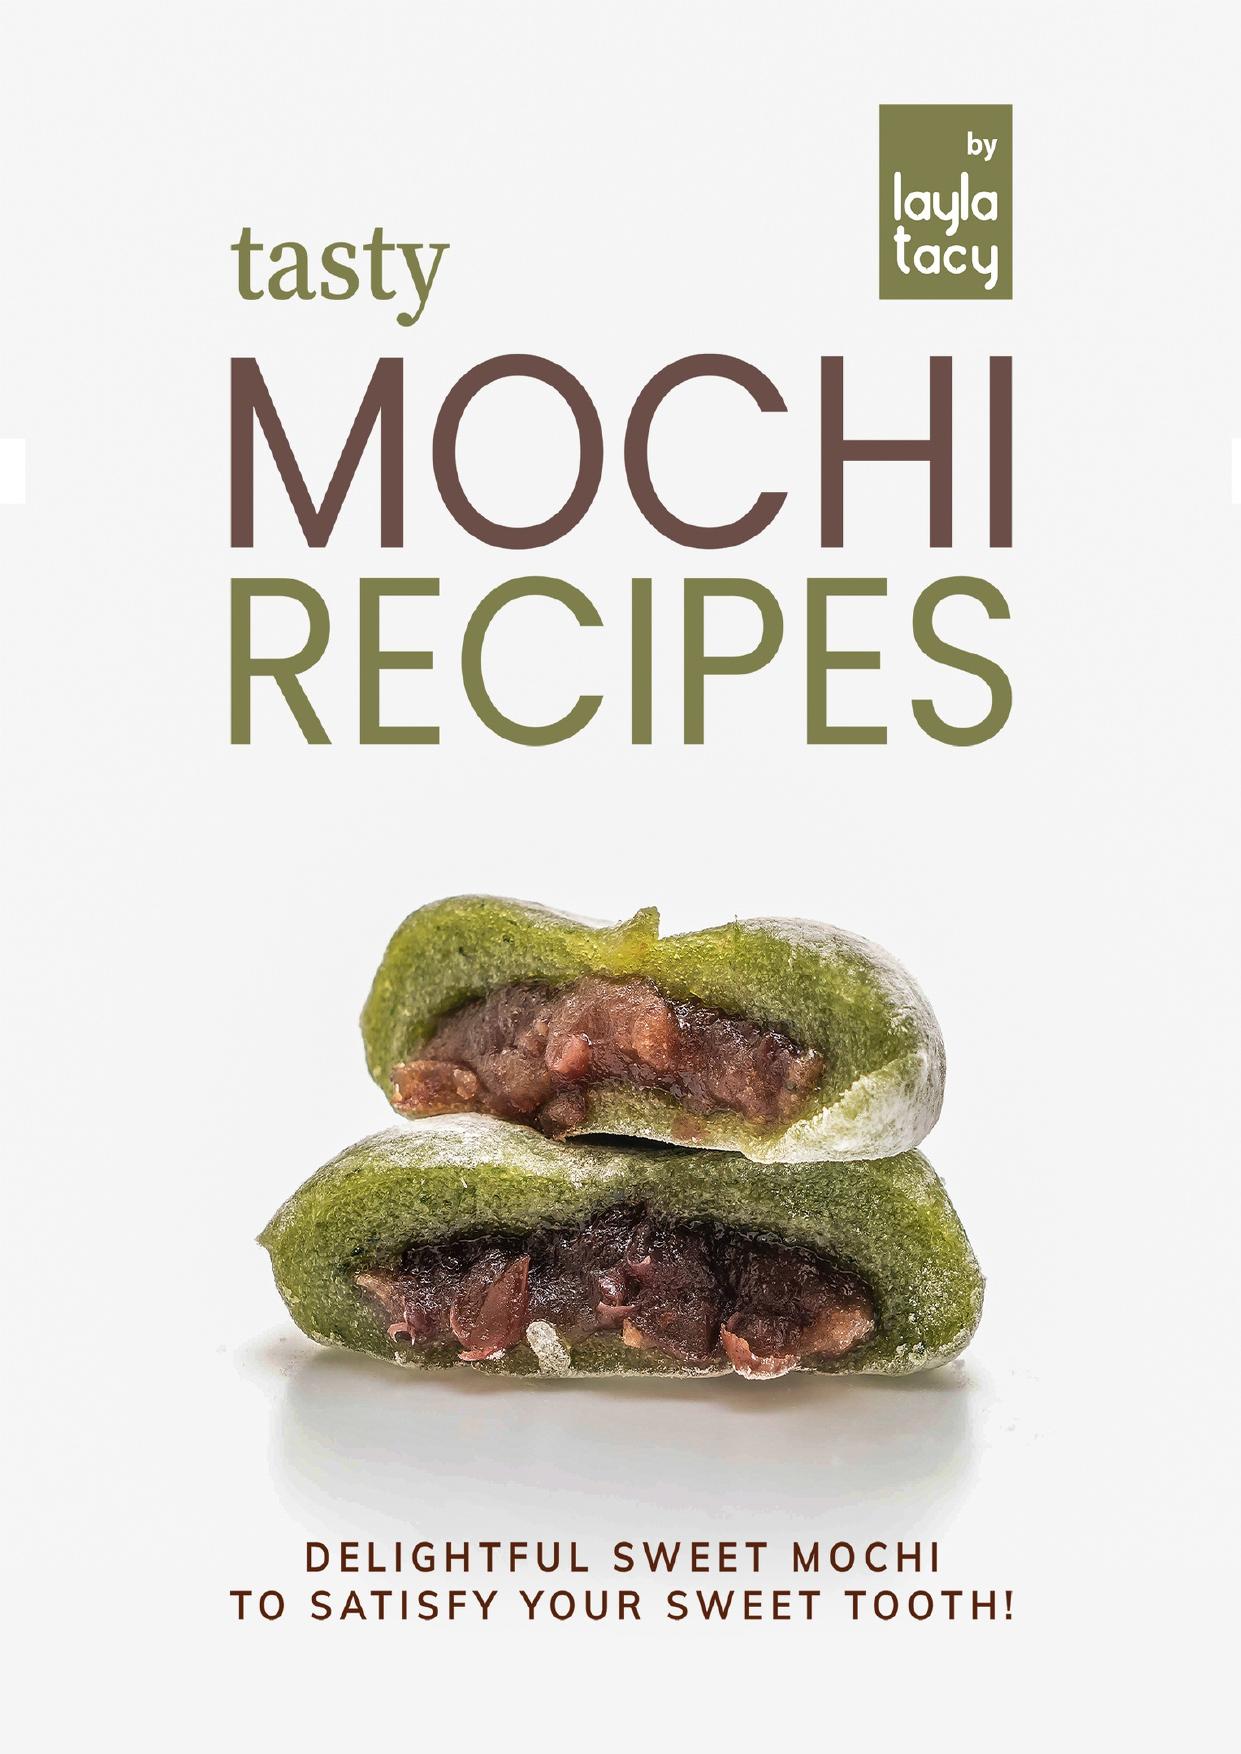 Tasty Mochi Recipes: Delightful Sweet Mochi to Satisfy Your Sweet Tooth! by Tacy Layla